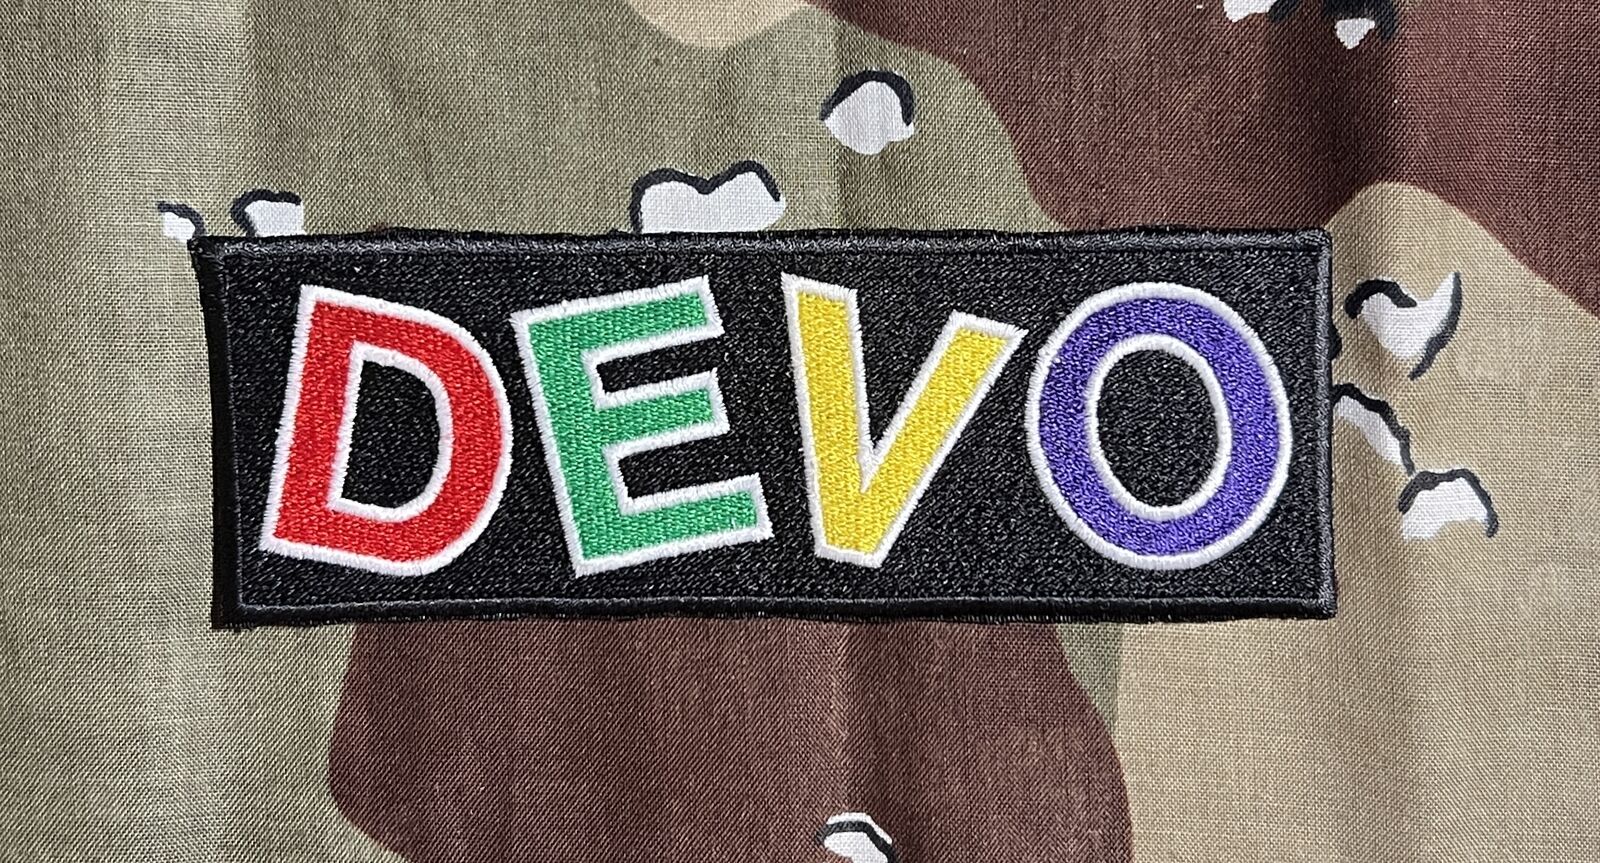 Devo Logo Embroidered Patch D085p